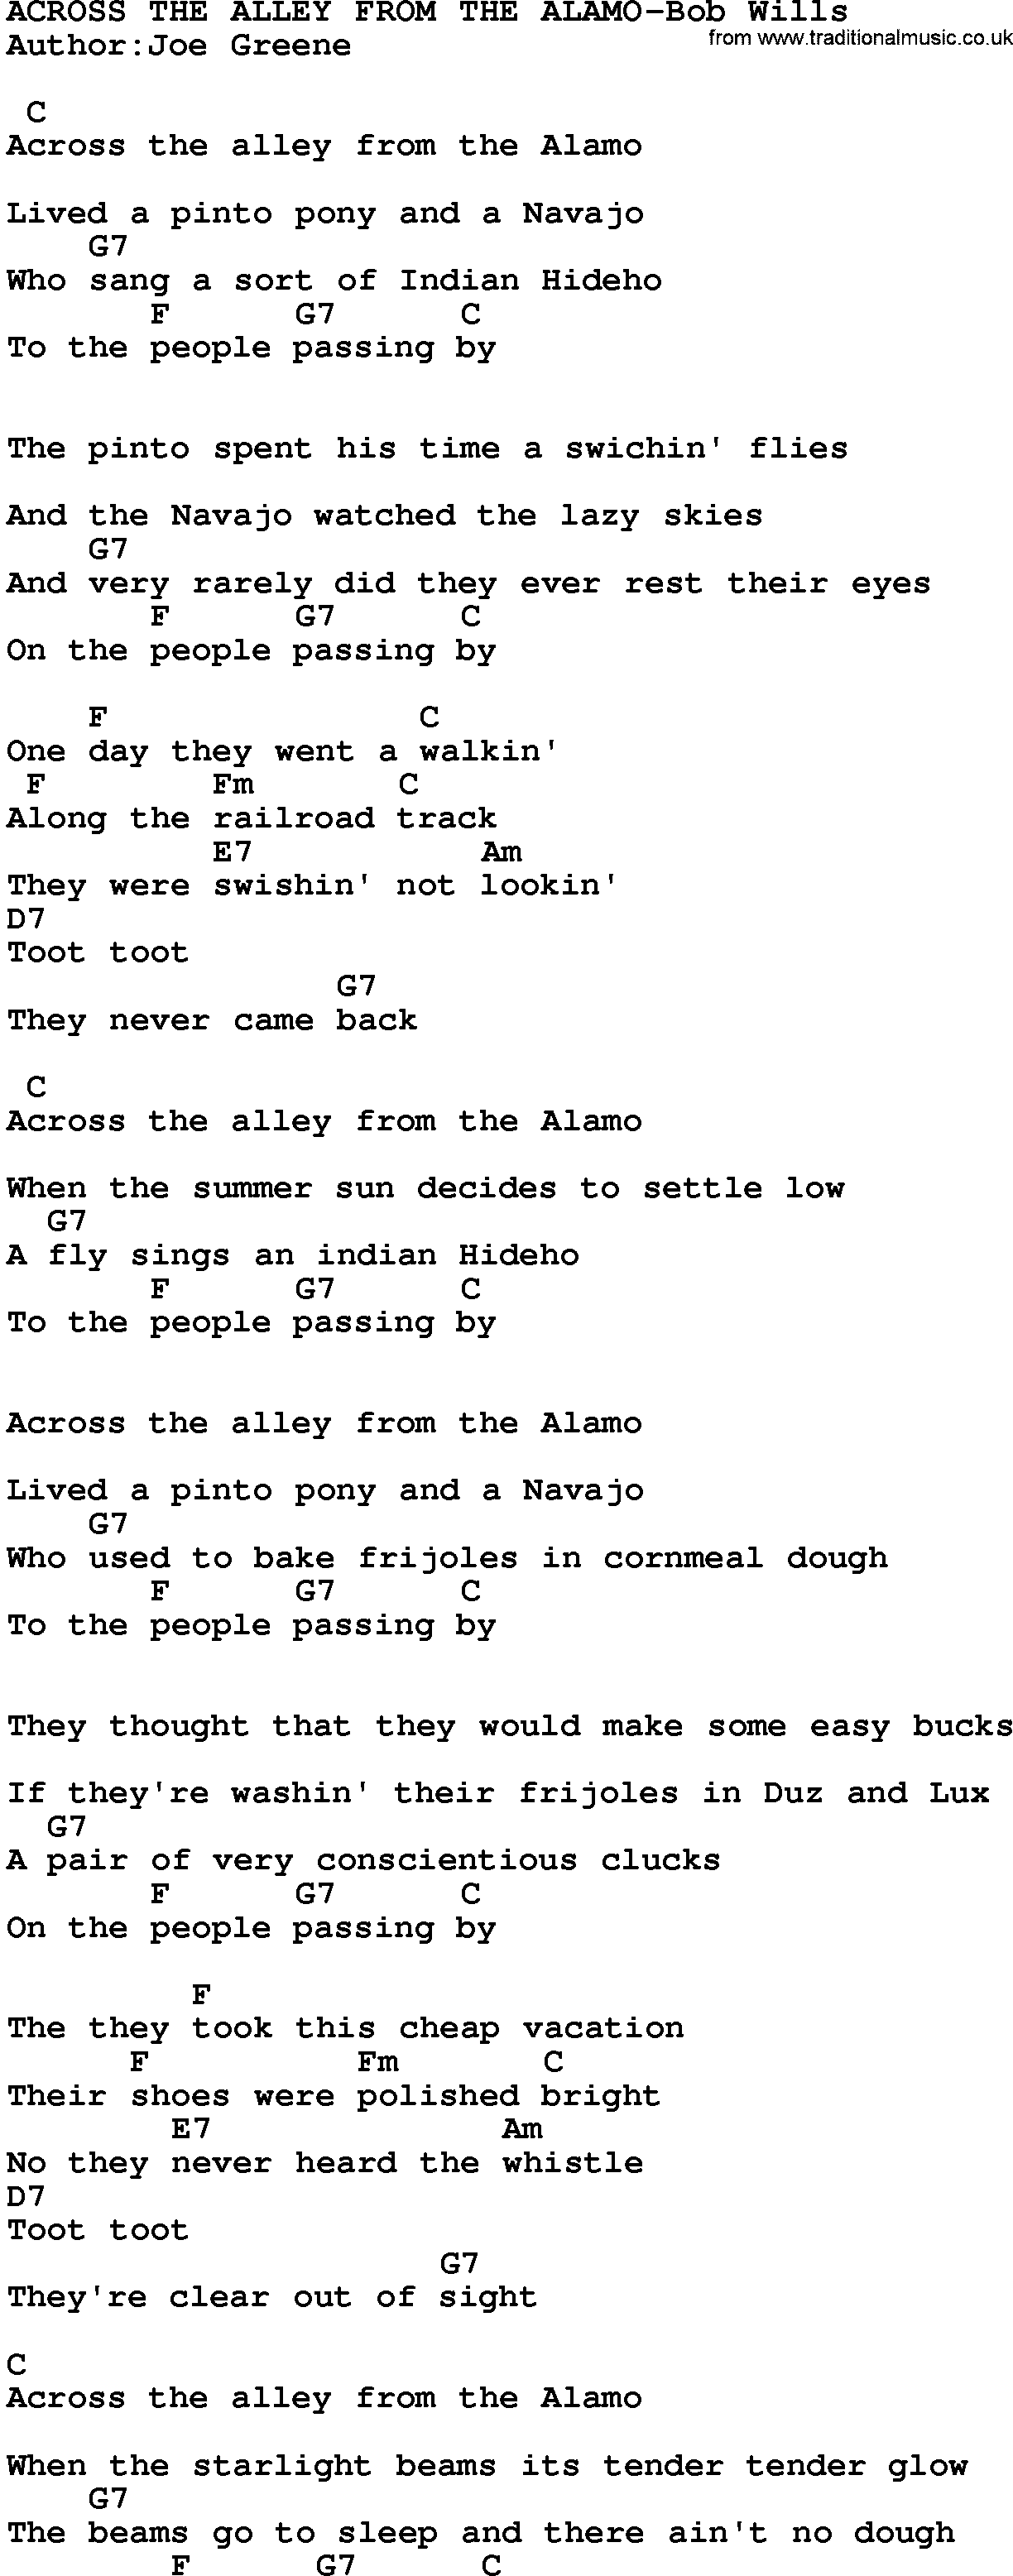 Country music song: Across The Alley From The Alamo-Bob Wills lyrics and chords